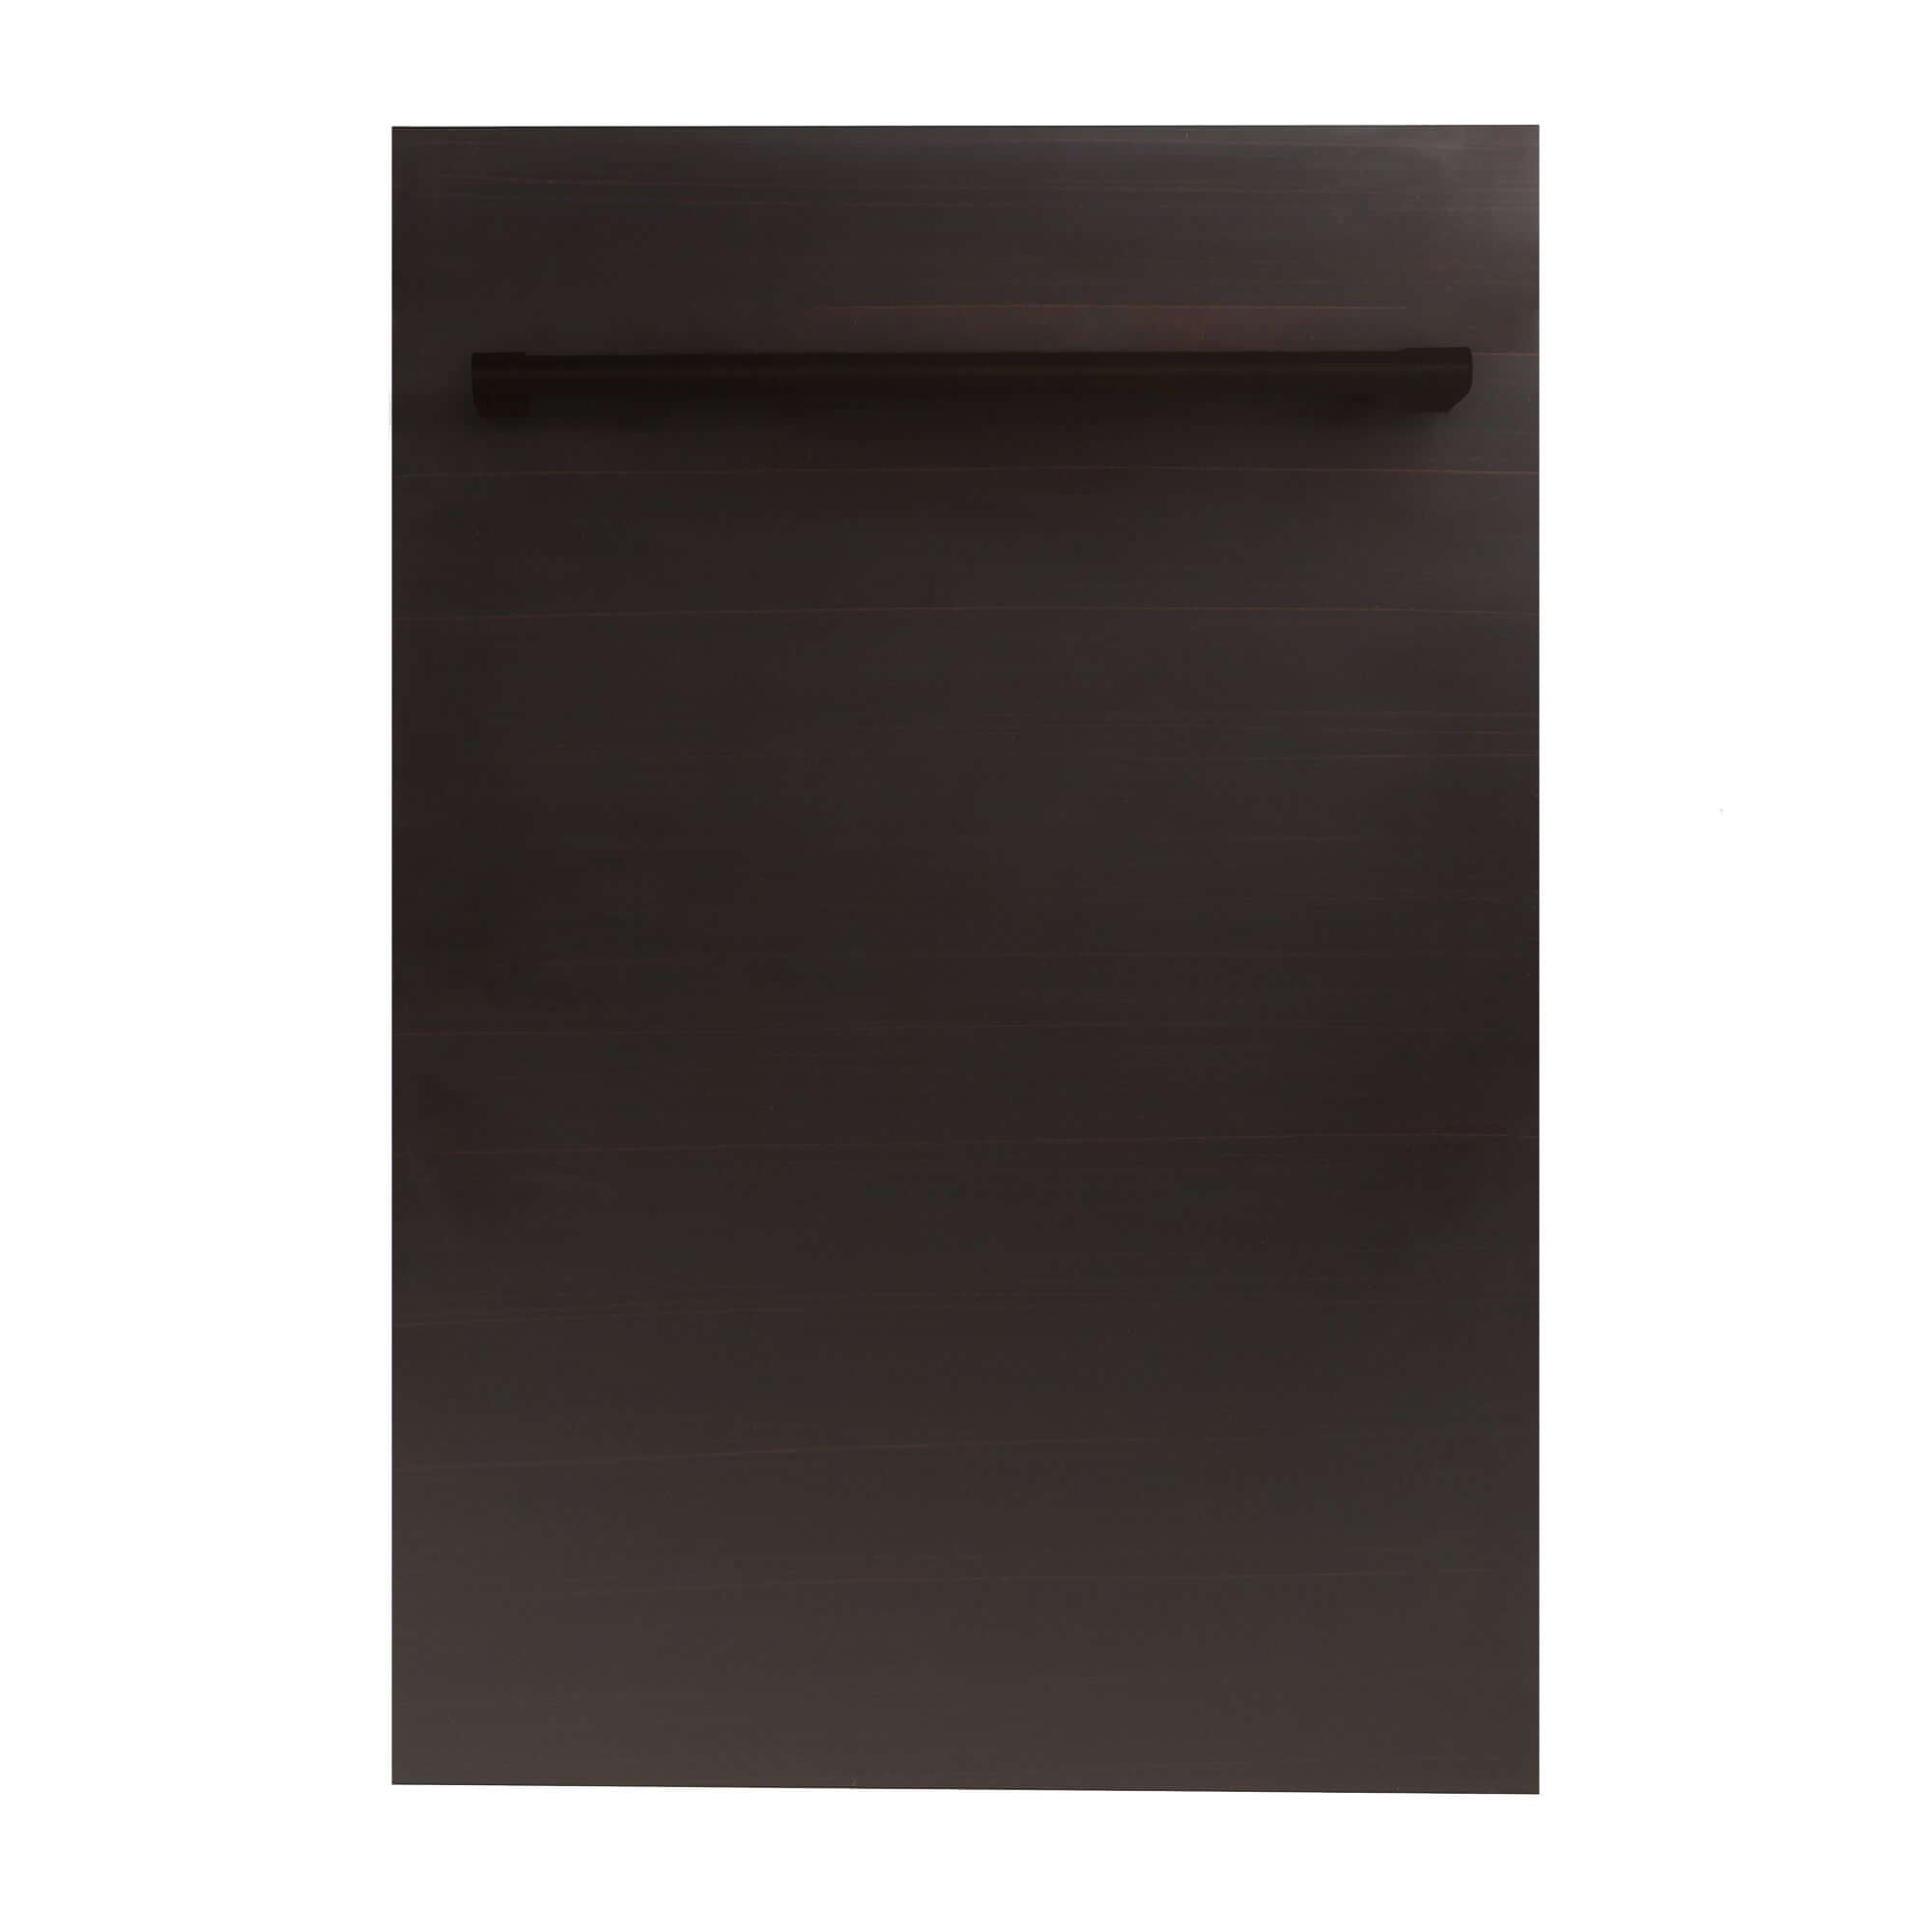 ZLINE 18 in. Compact Oil-Rubbed Bronze Top Control Built-In Dishwasher with Stainless Steel Tub and Traditional Style Handle, 52dBa (DW-ORB-H-18)